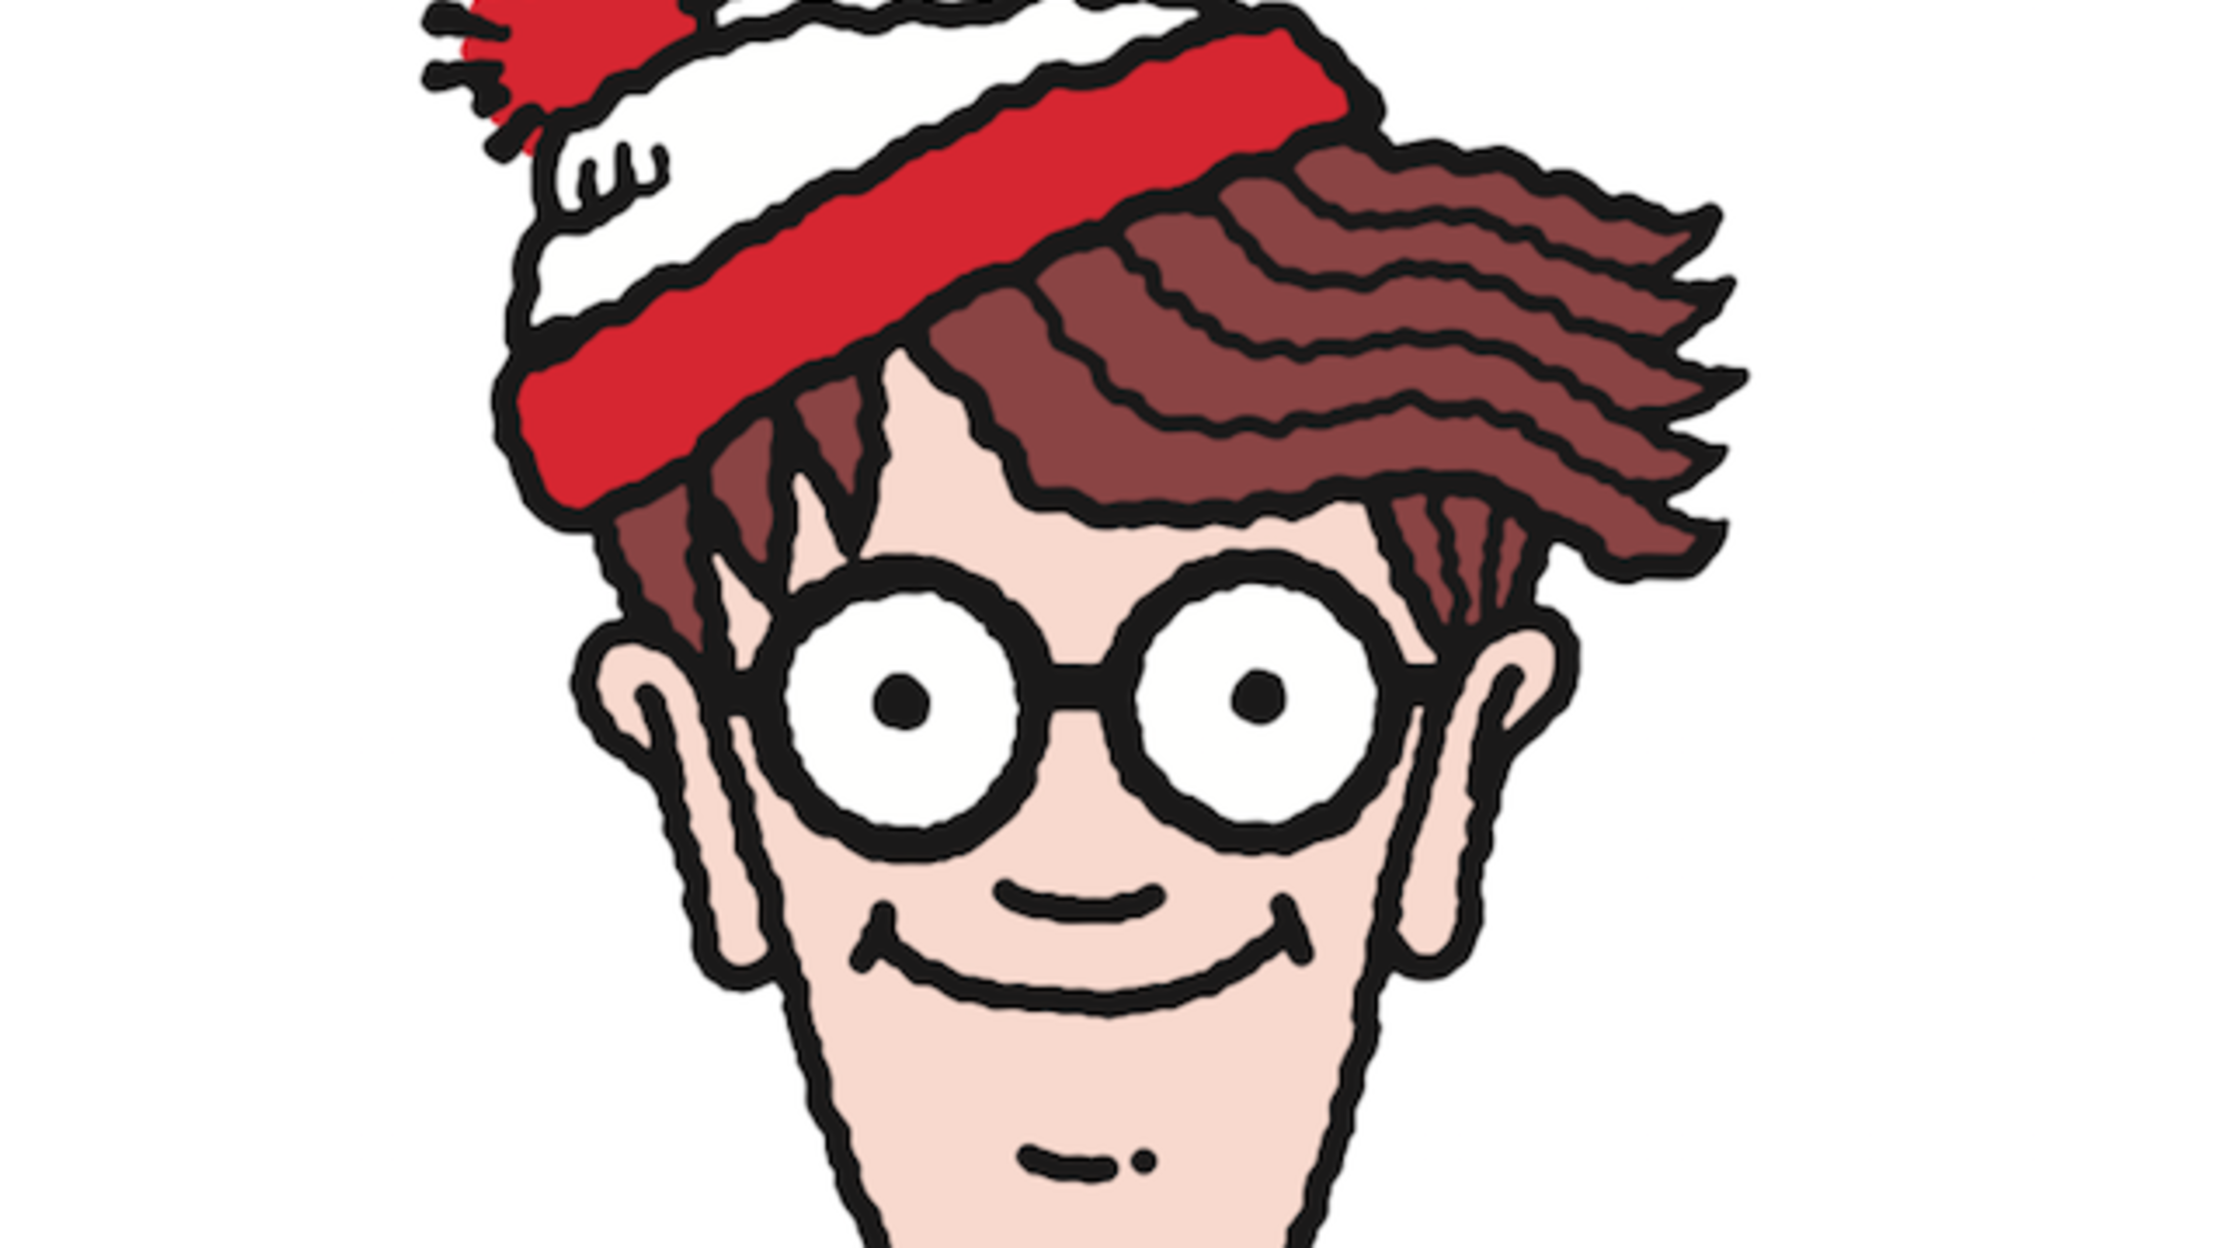 14 Facts About 'Where's Waldo?' | Mental Floss